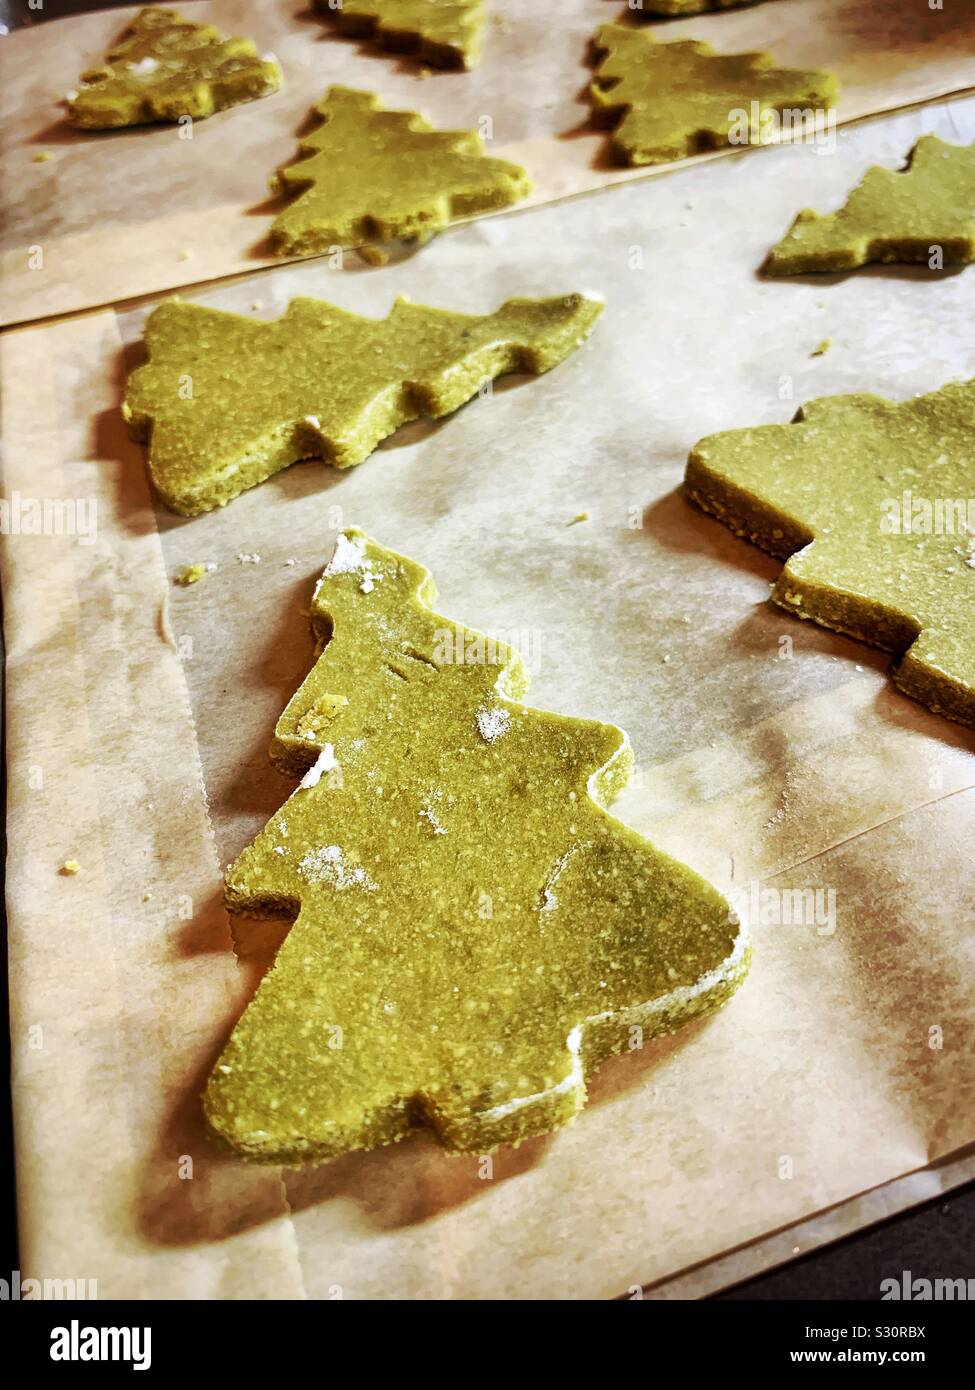 Green matcha Christmas tree cookies are placed on a baking sheet ready to go into the oven. Stock Photo